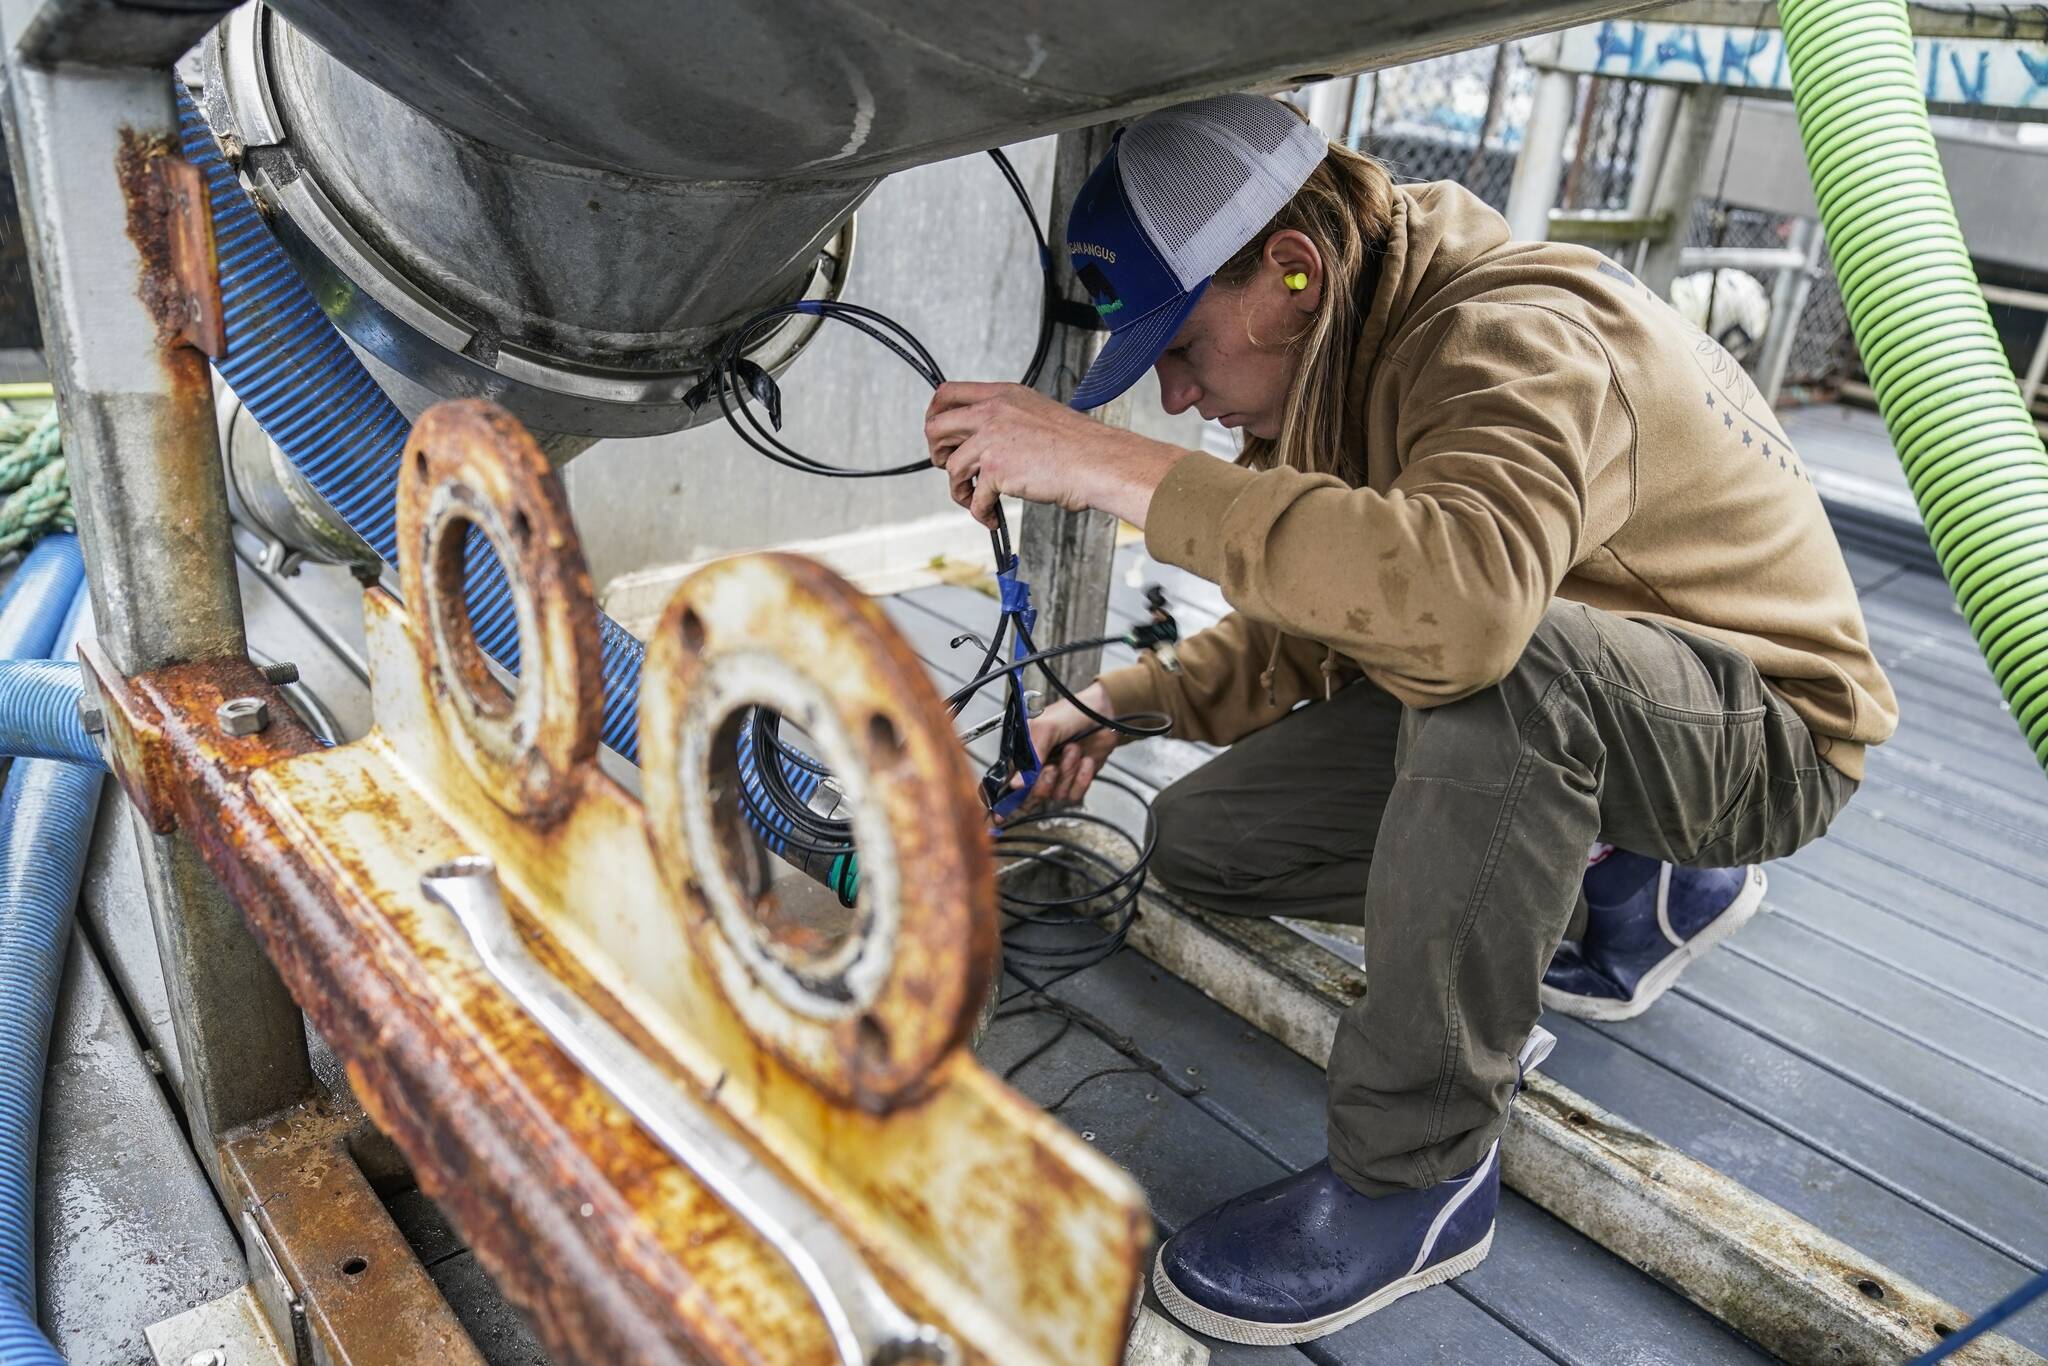 Lane Bolich, captain of the Harmony, reattaches a new hose for the boat’s tendering tanks, Saturday, June 24, 2023, in Kodiak, Alaska. After working as a deckhand for two years, he took the wheel as captain this year at just 20 years old. (AP Photo/Joshua A. Bickel)